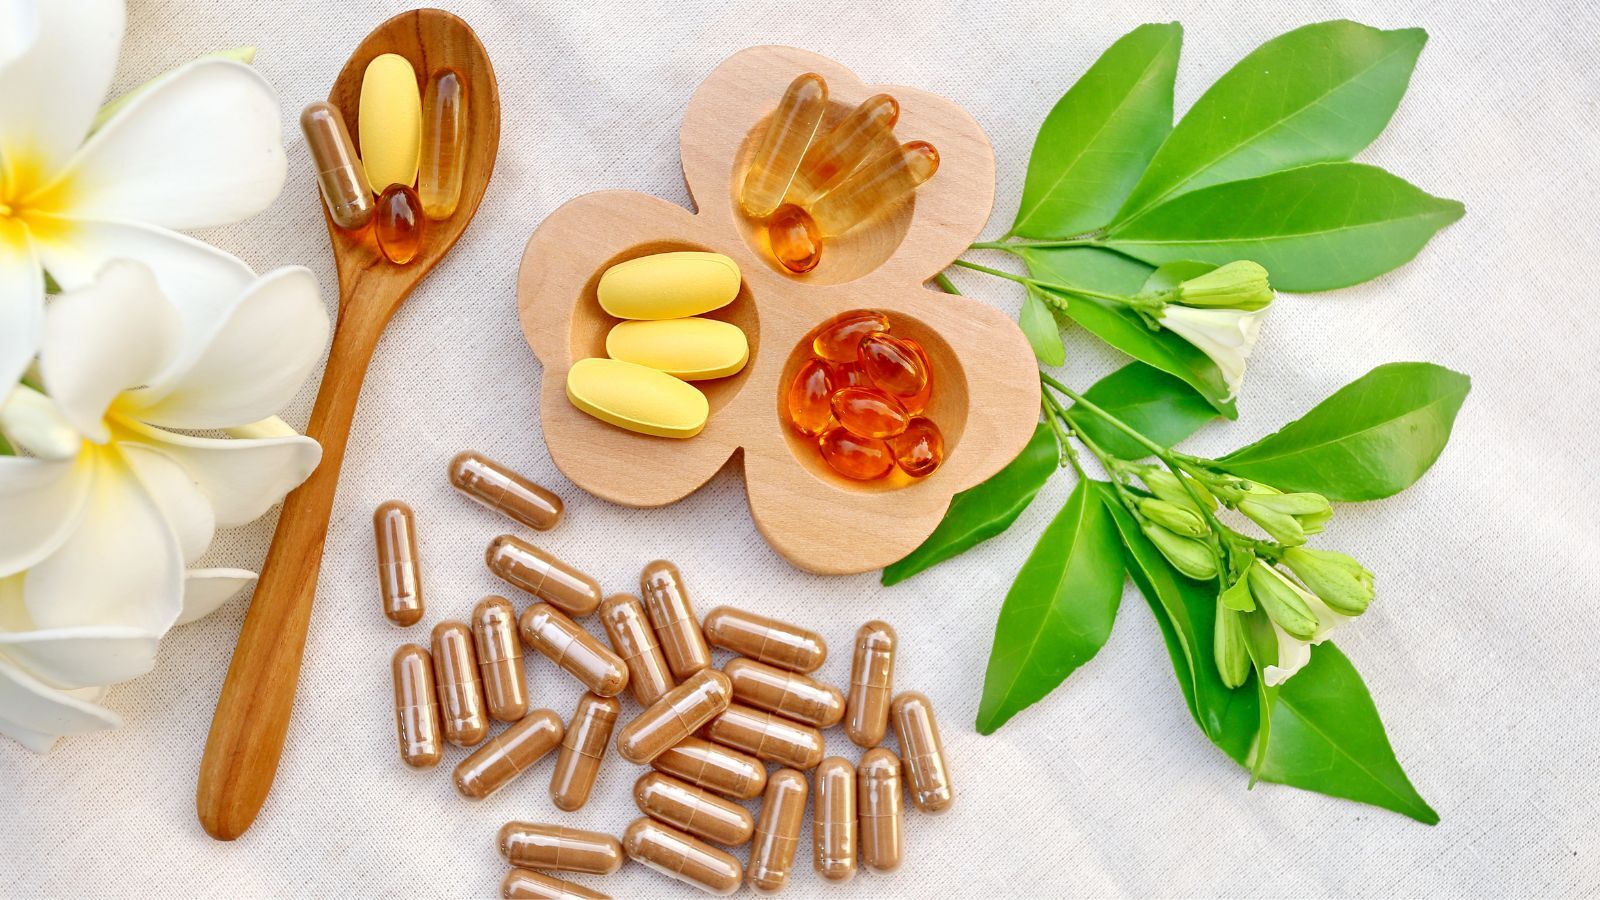 12 Best Vitamin Brands to Keep Your Healthy & Help Body to Function